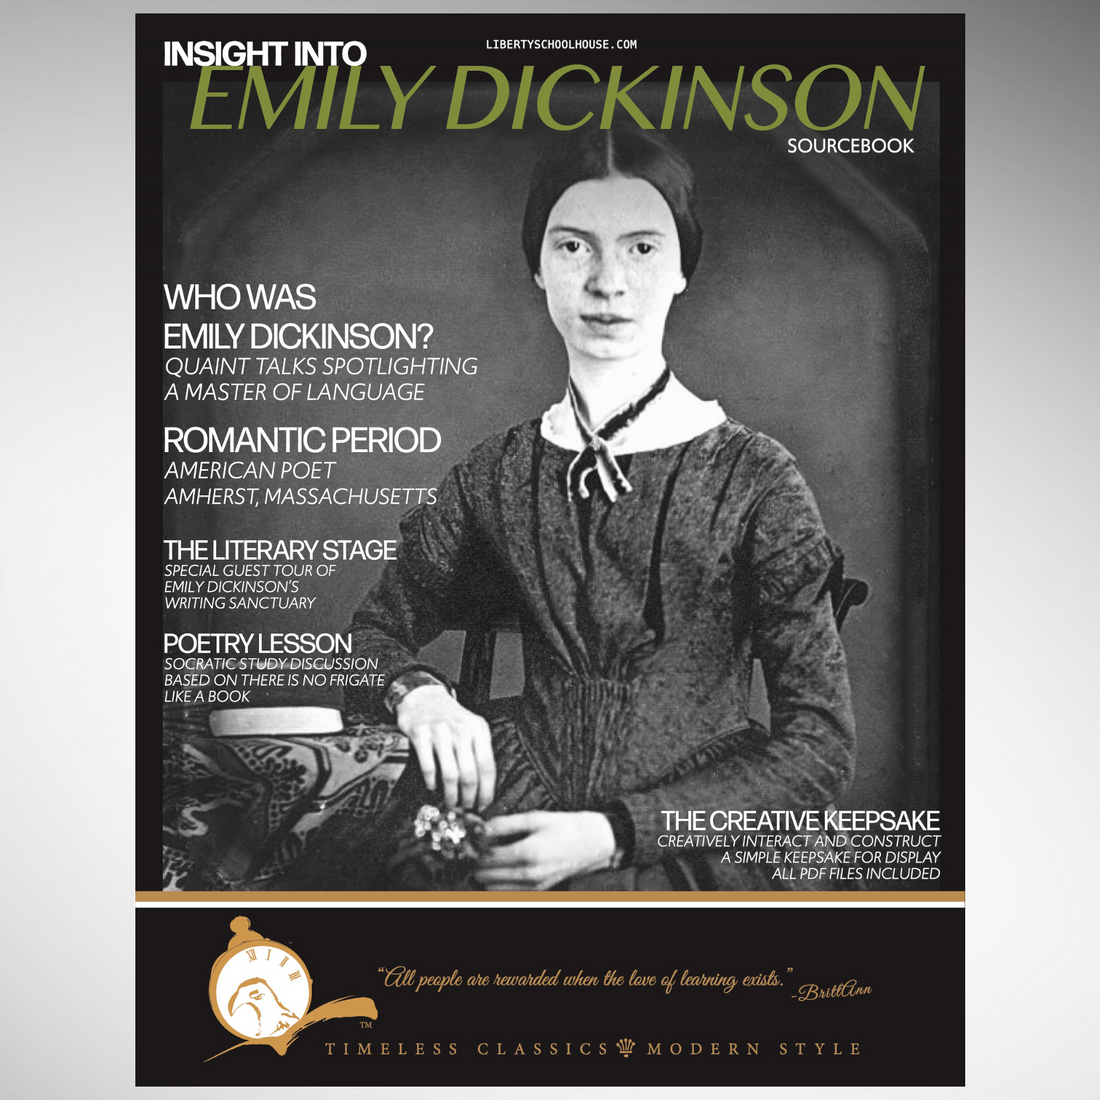 INSIGHT INTO EMILY DICKINSON SOURCEBOOK